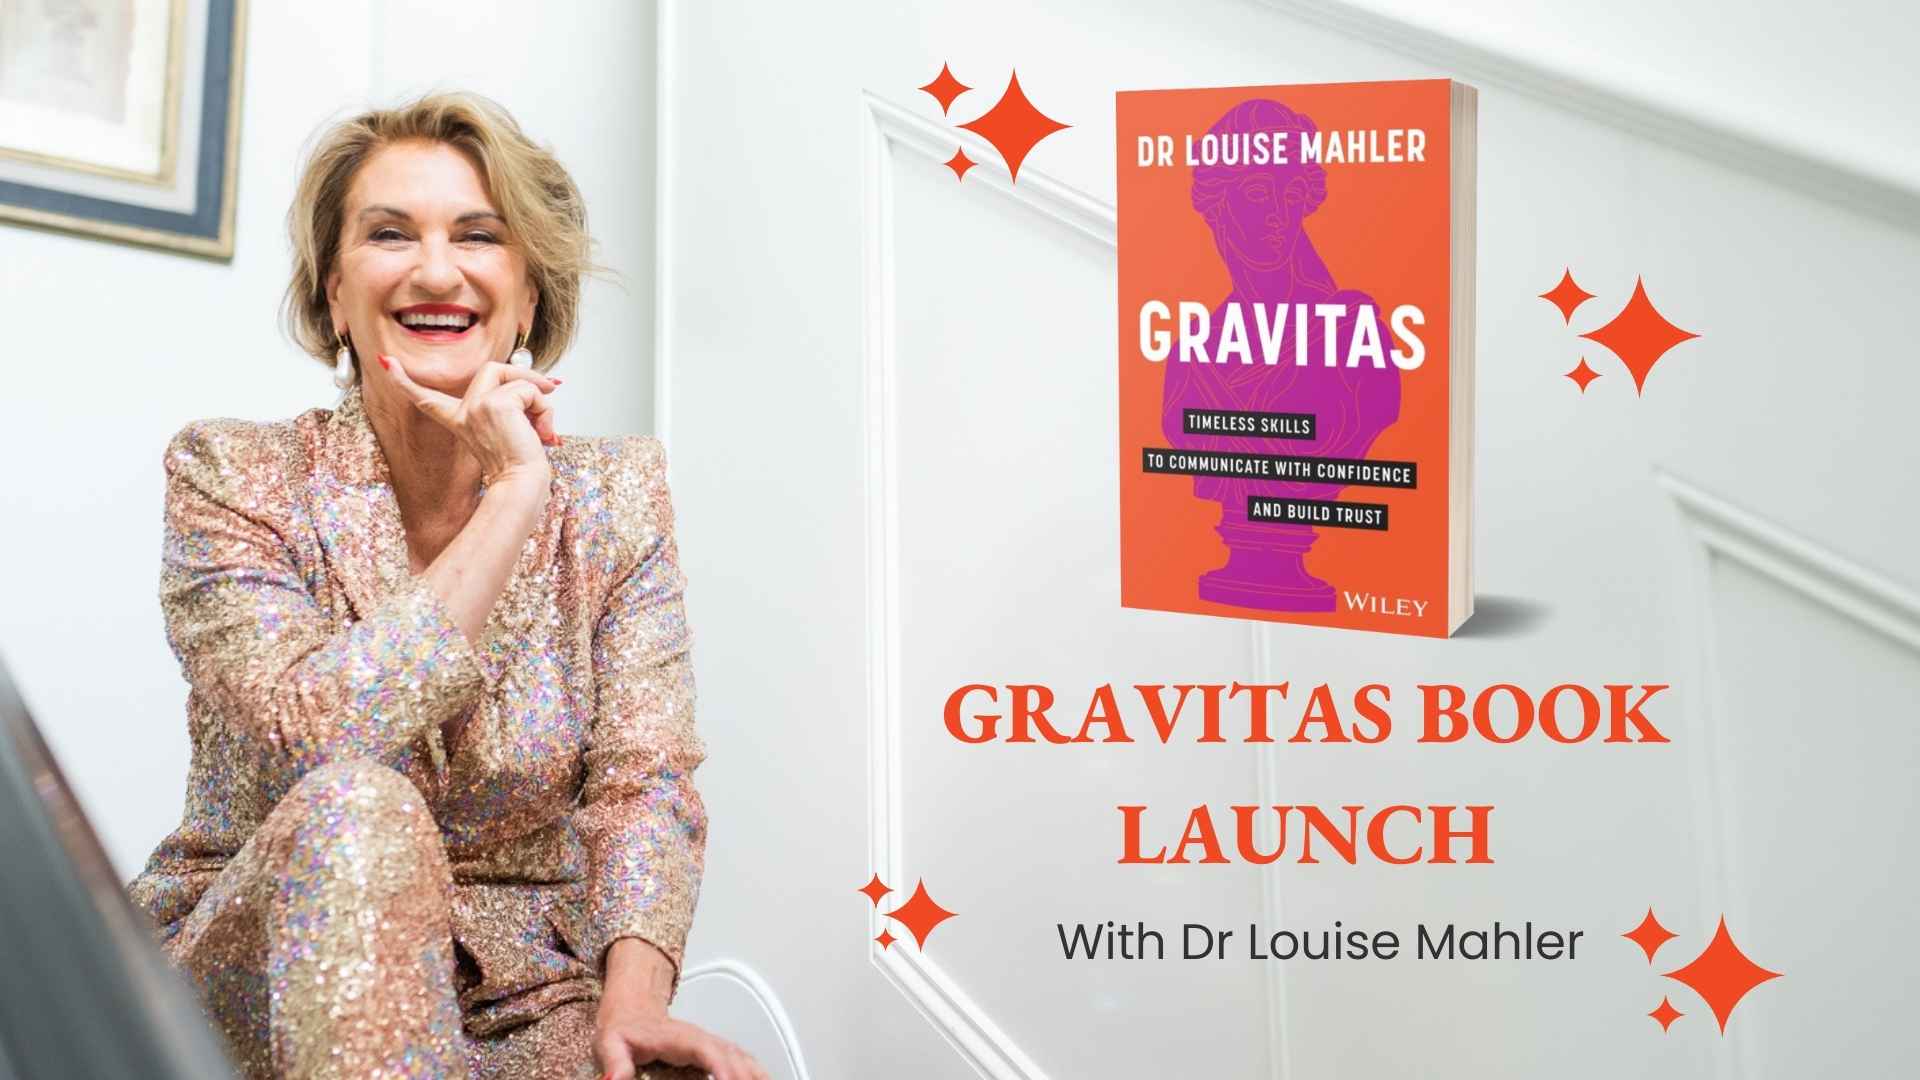 Praise your Audience Join me at the launch of the Gravitas Book